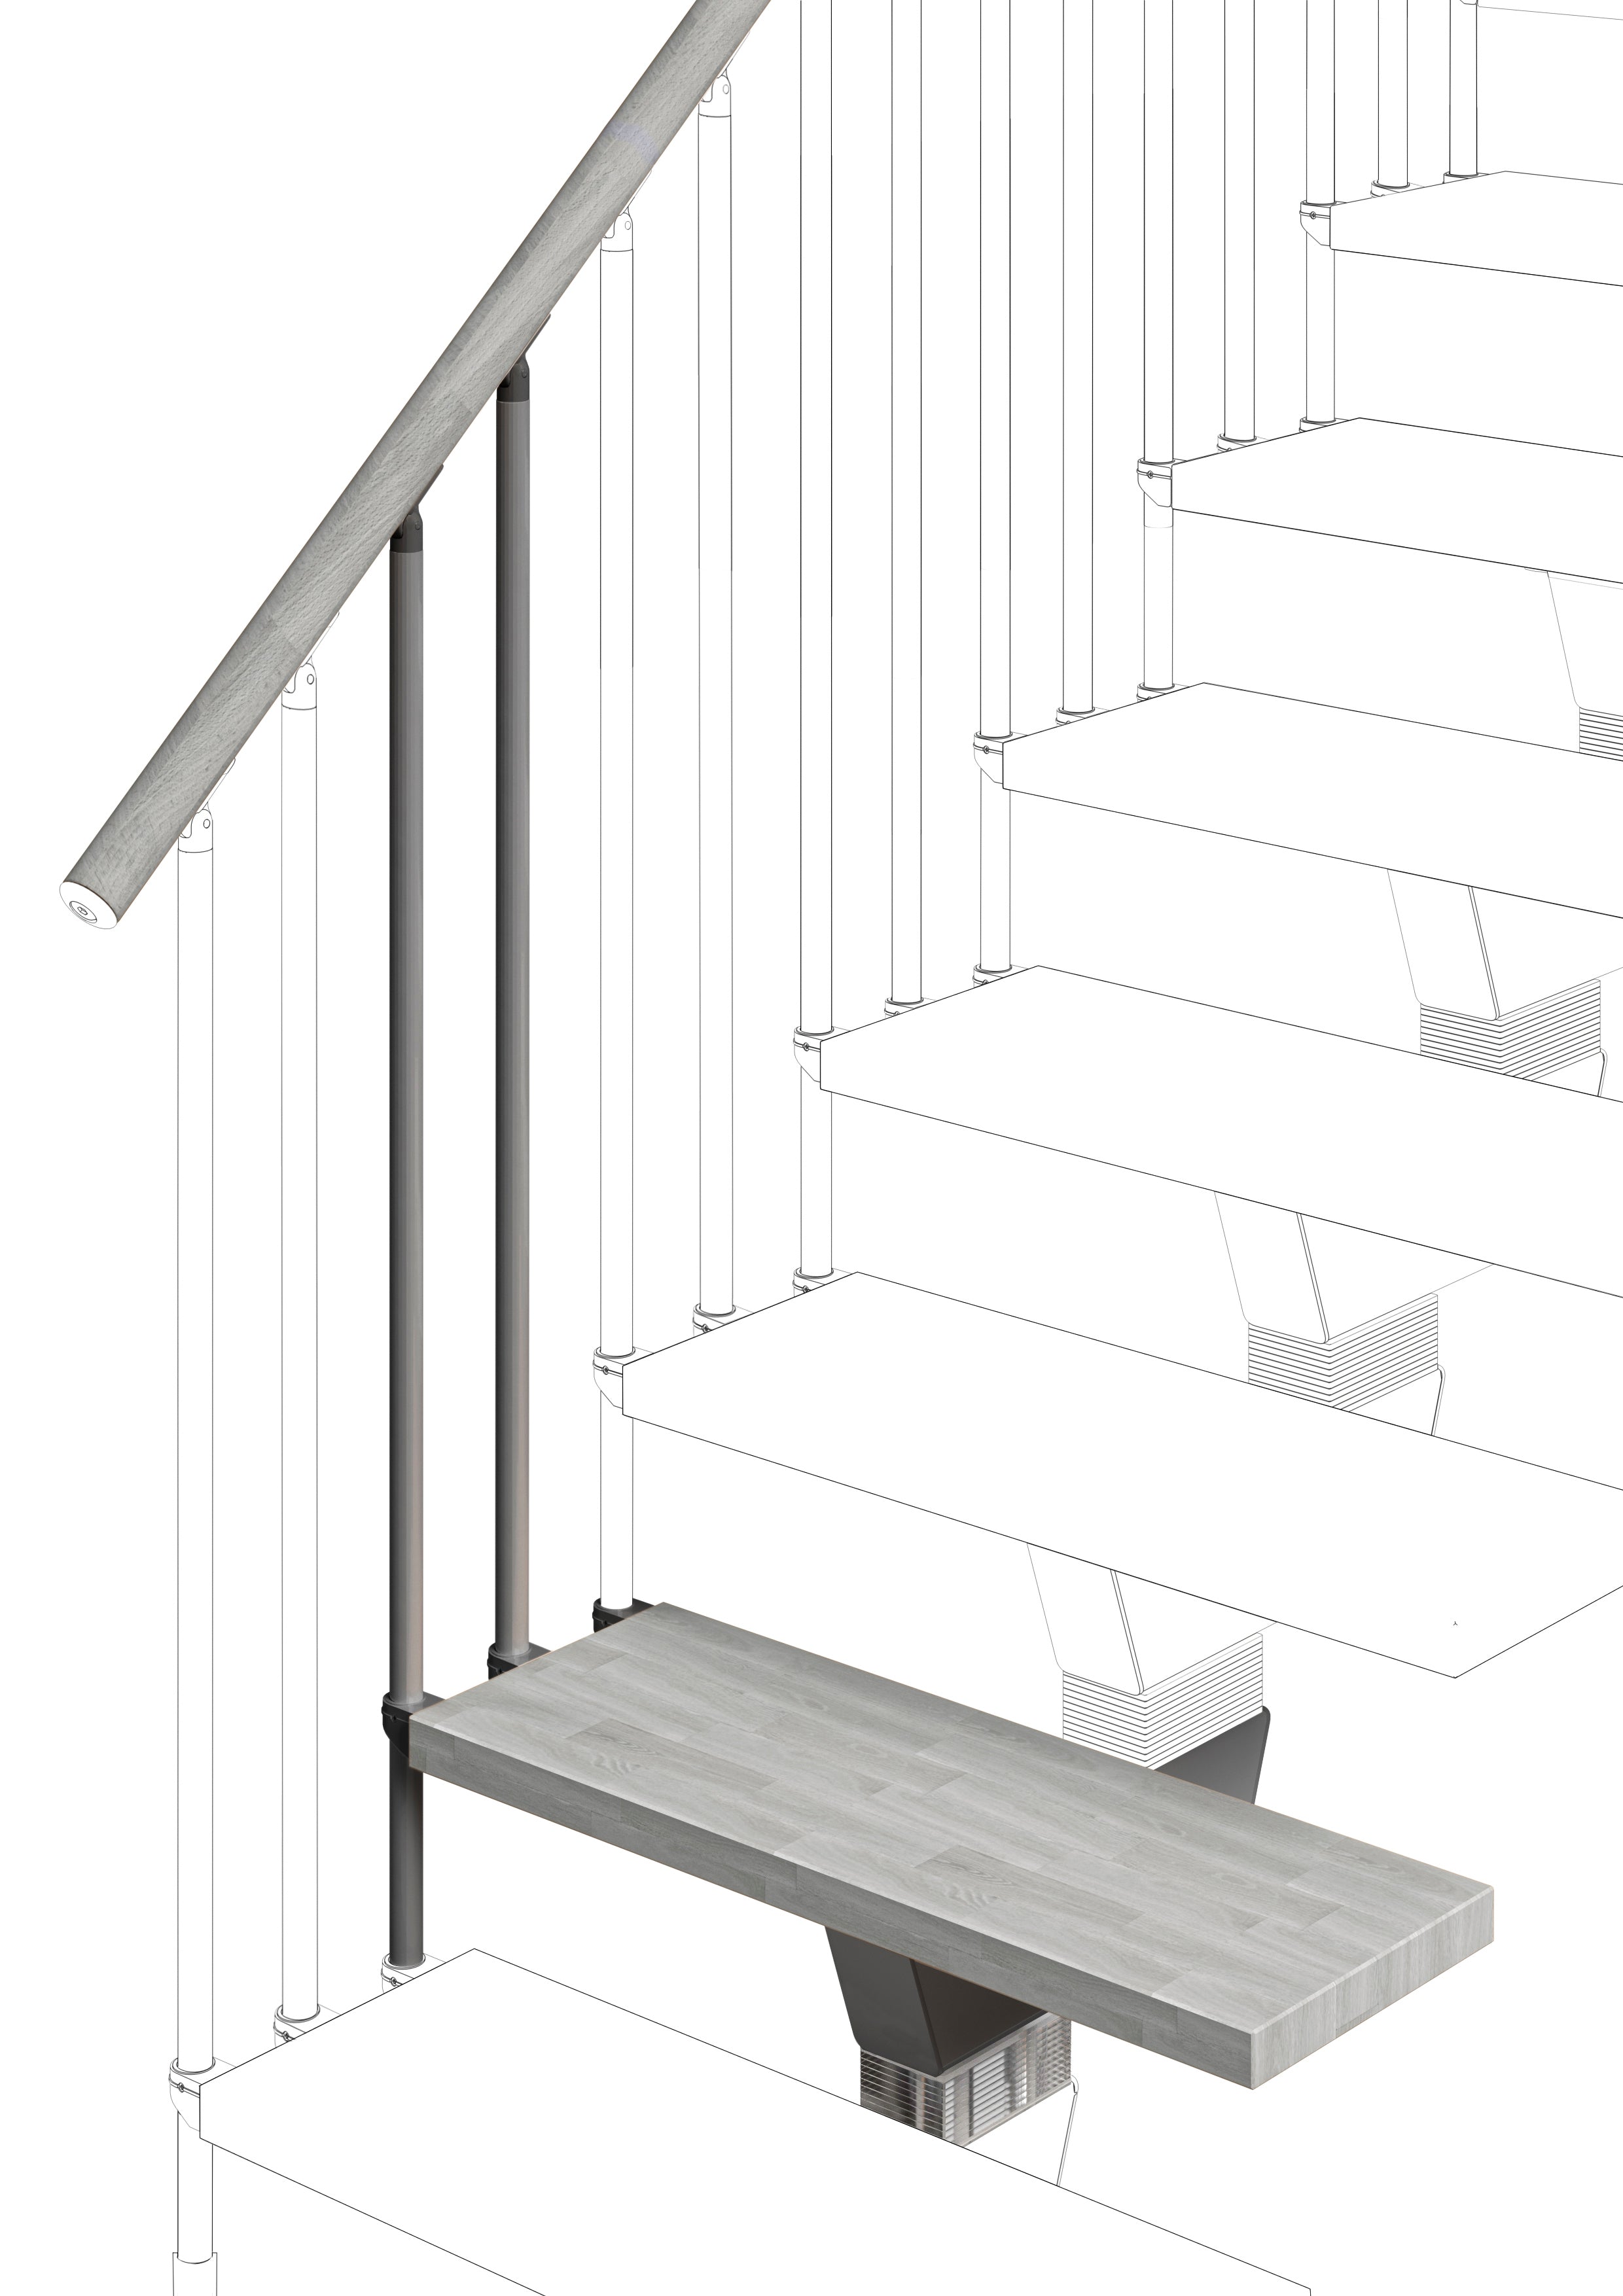 Additional step Modularis 85cm (with structure and railing) - Cement 89